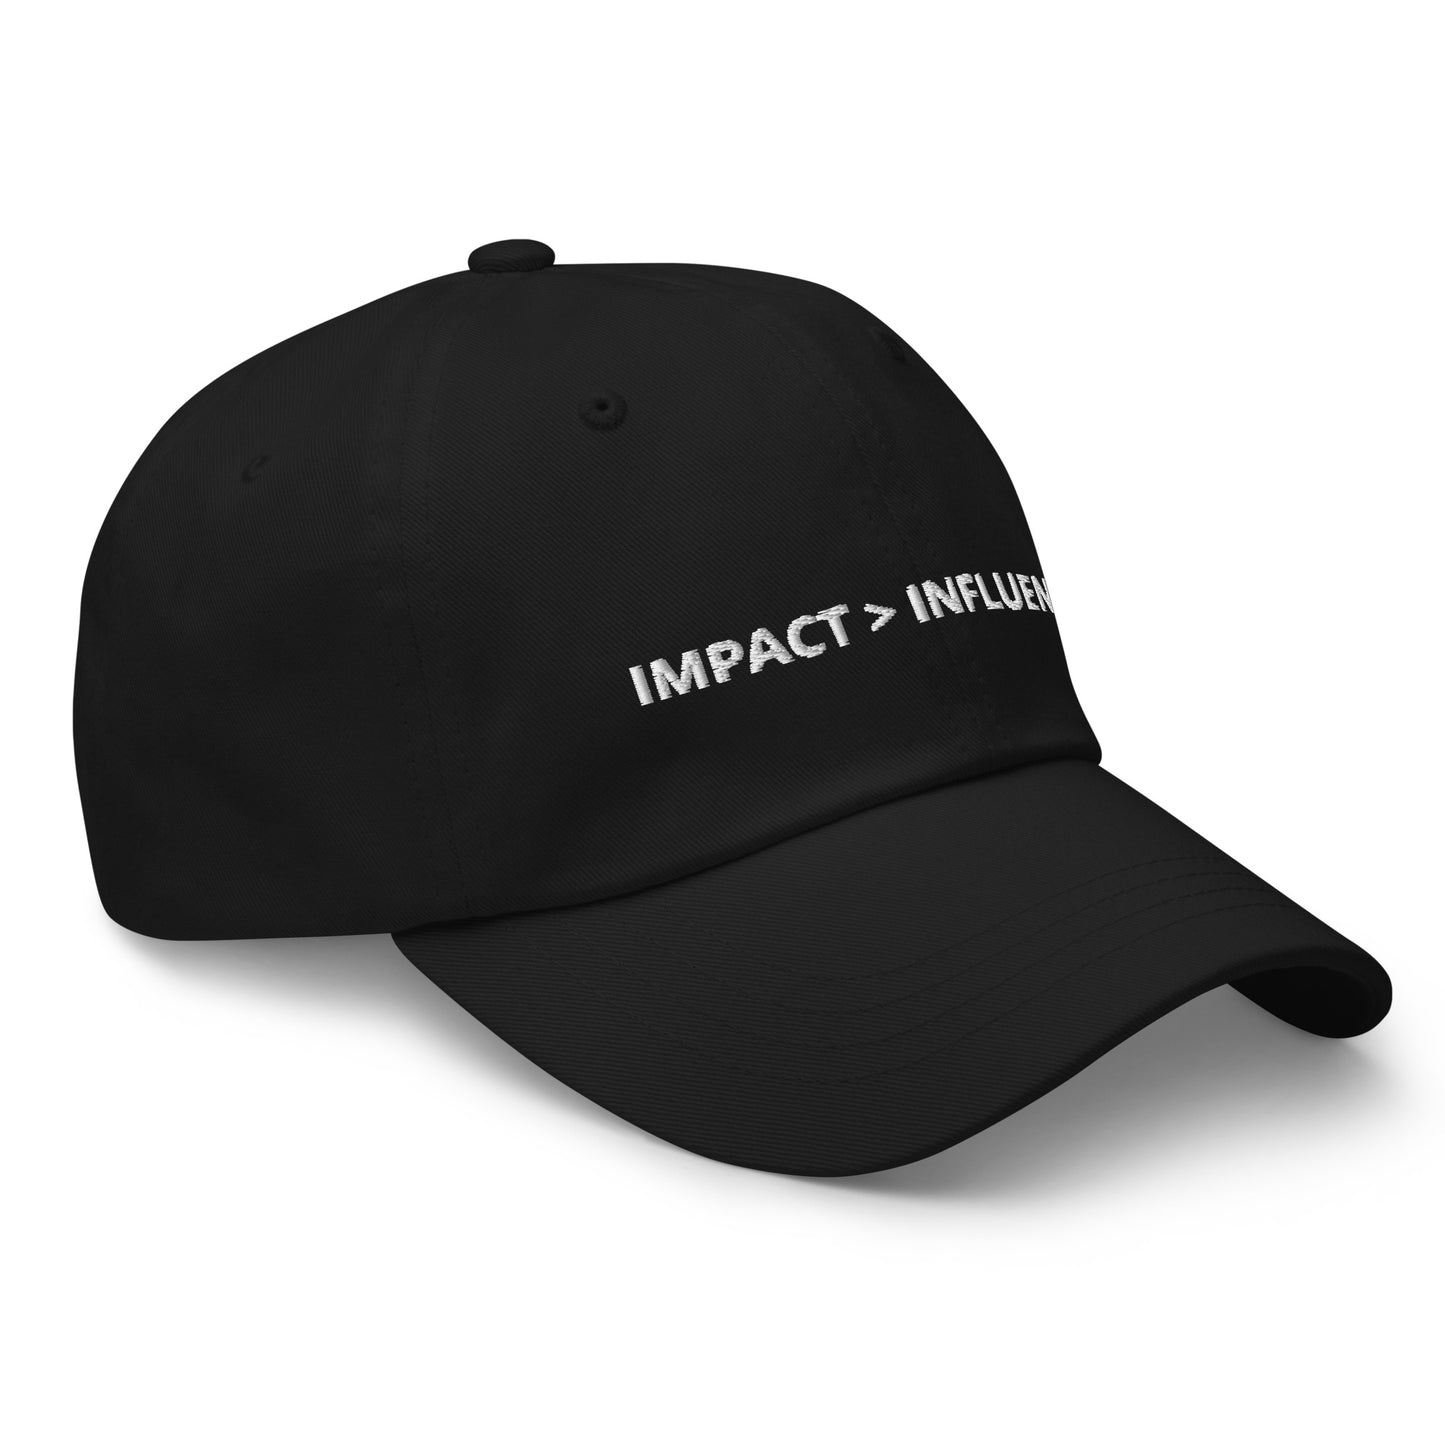 IMPACT > INFLUENCE Dad hat